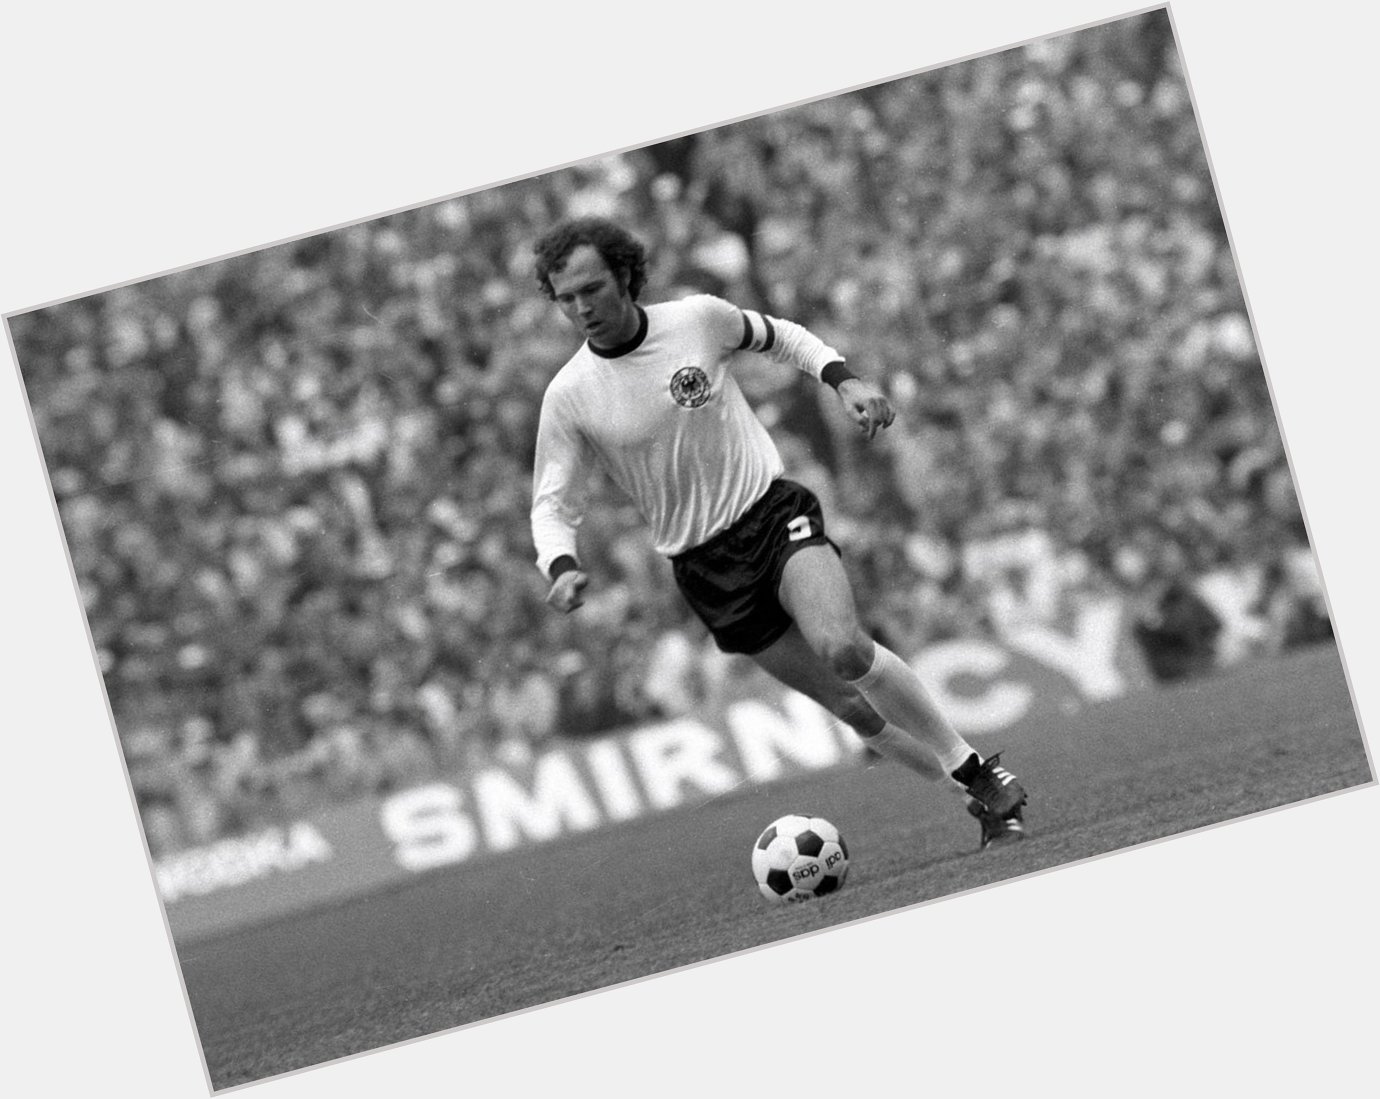 Happy Birthday Franz Beckenbauer!

He is often credited as having invented the role of the modern sweeper. 